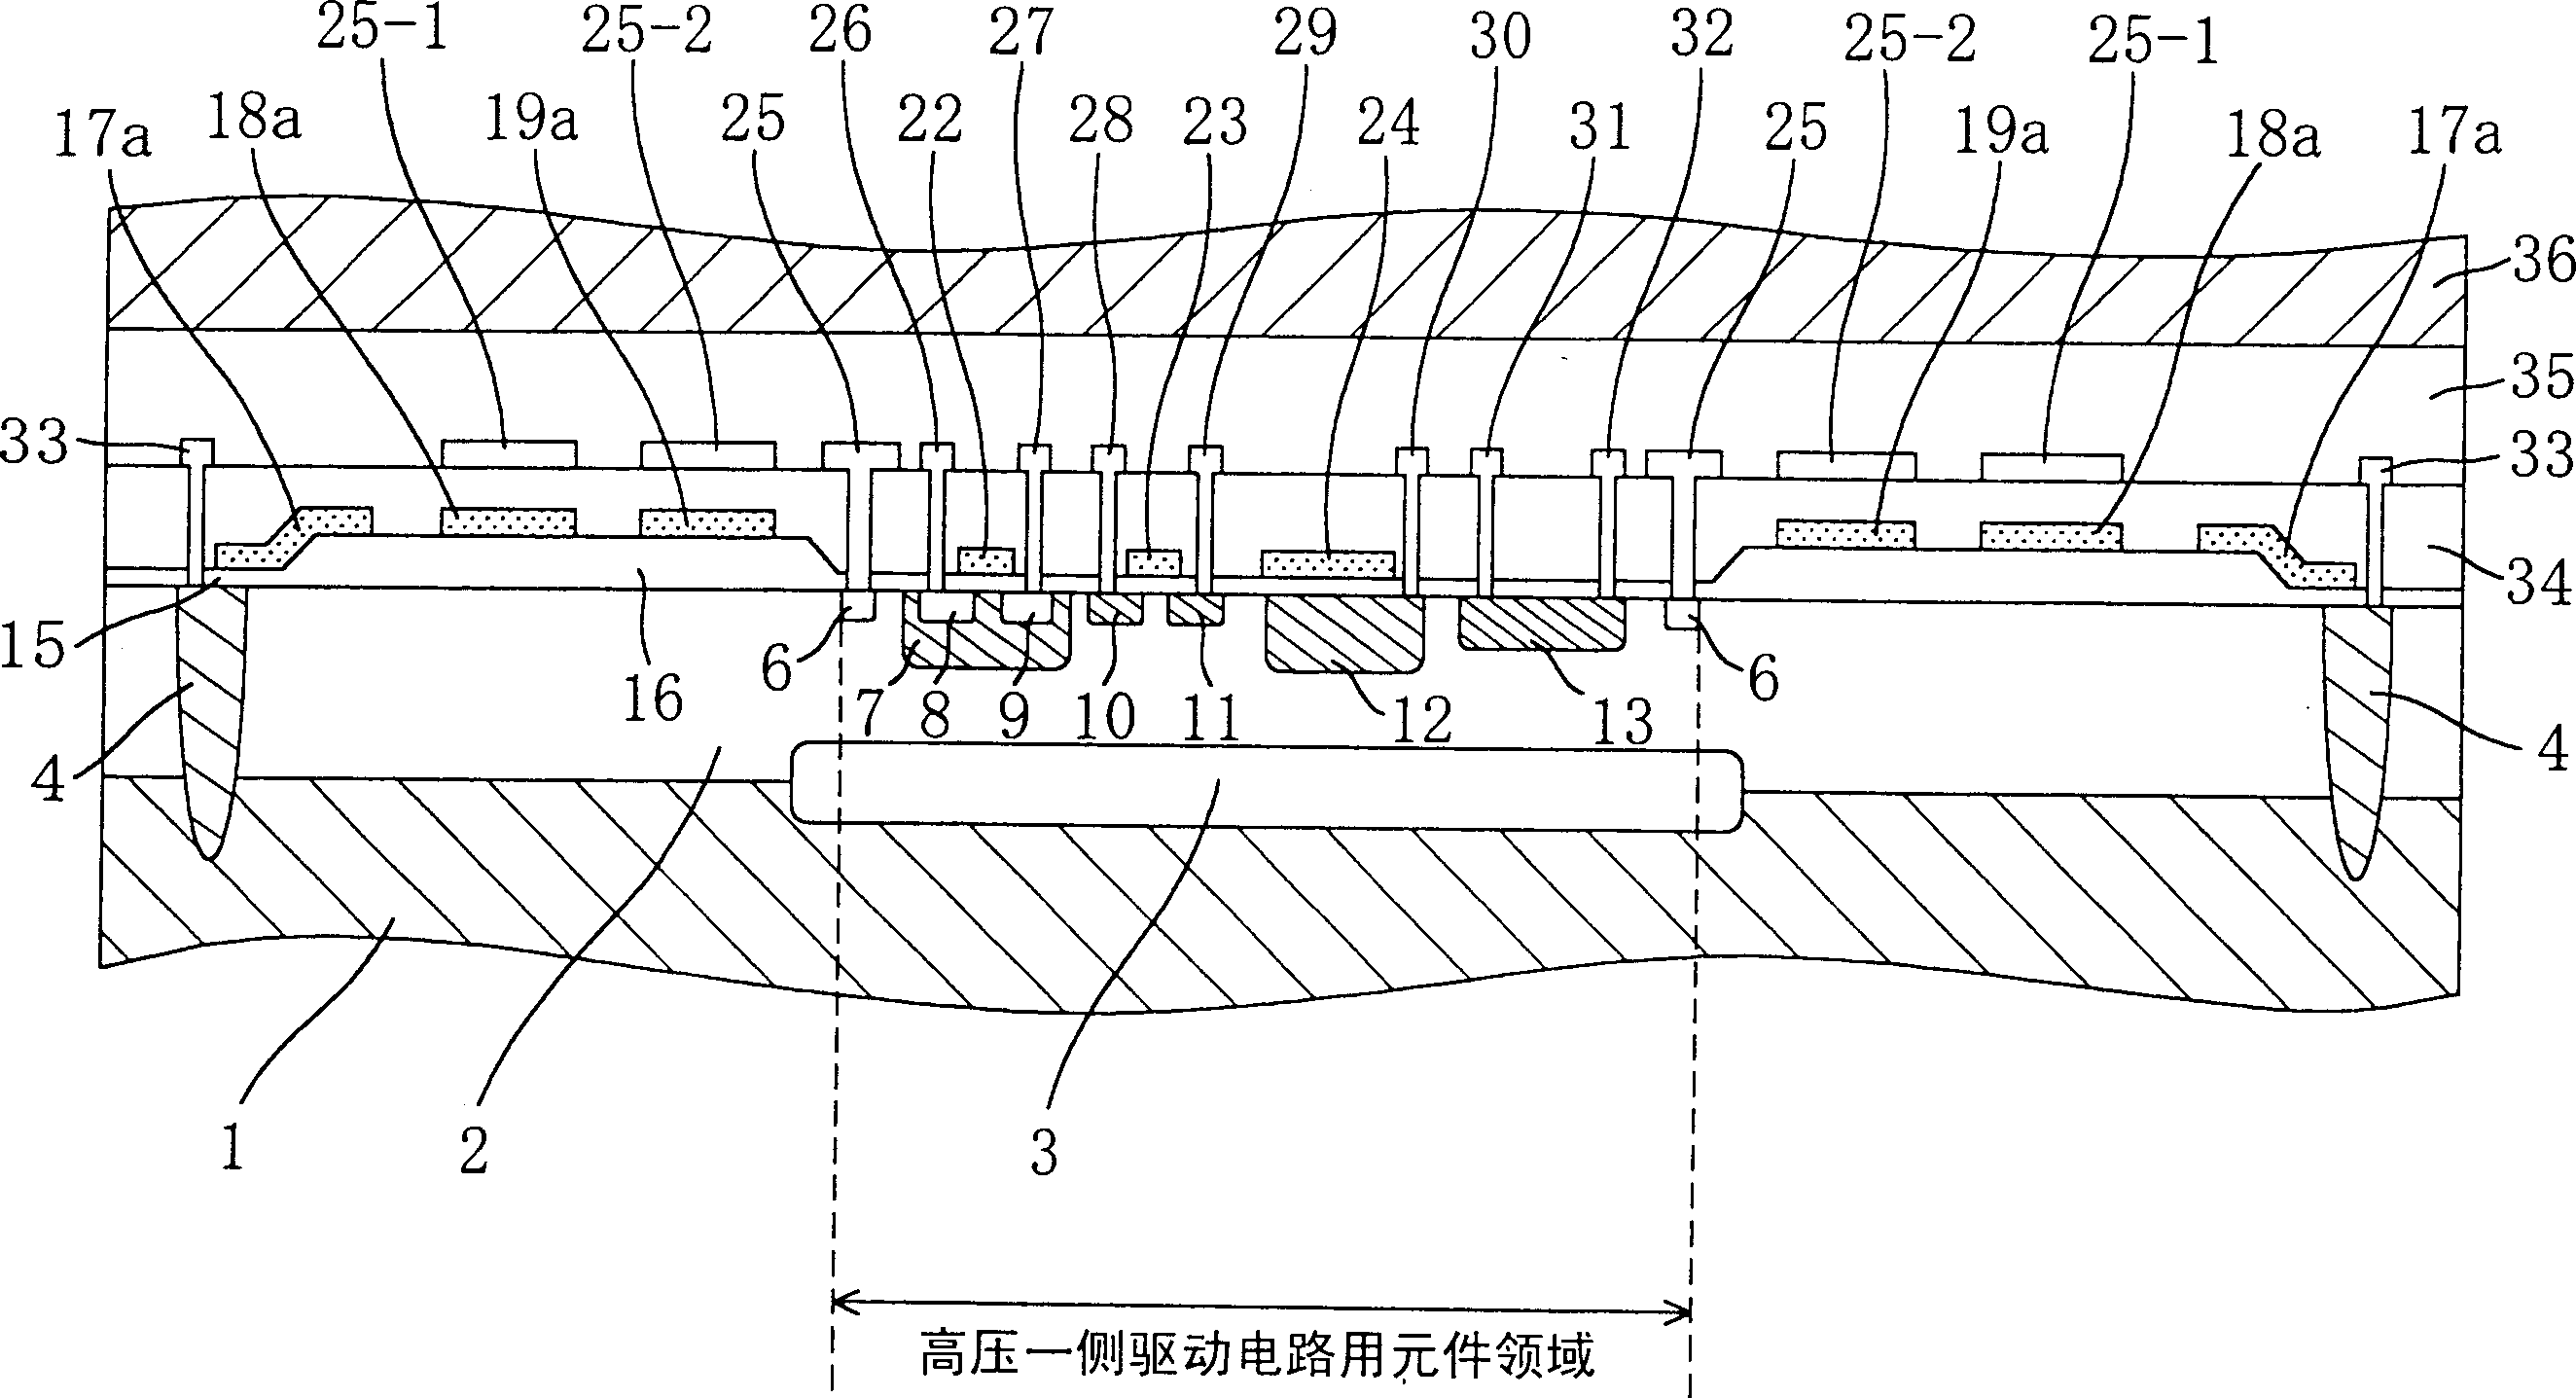 High-voltage-resistant semiconductor device